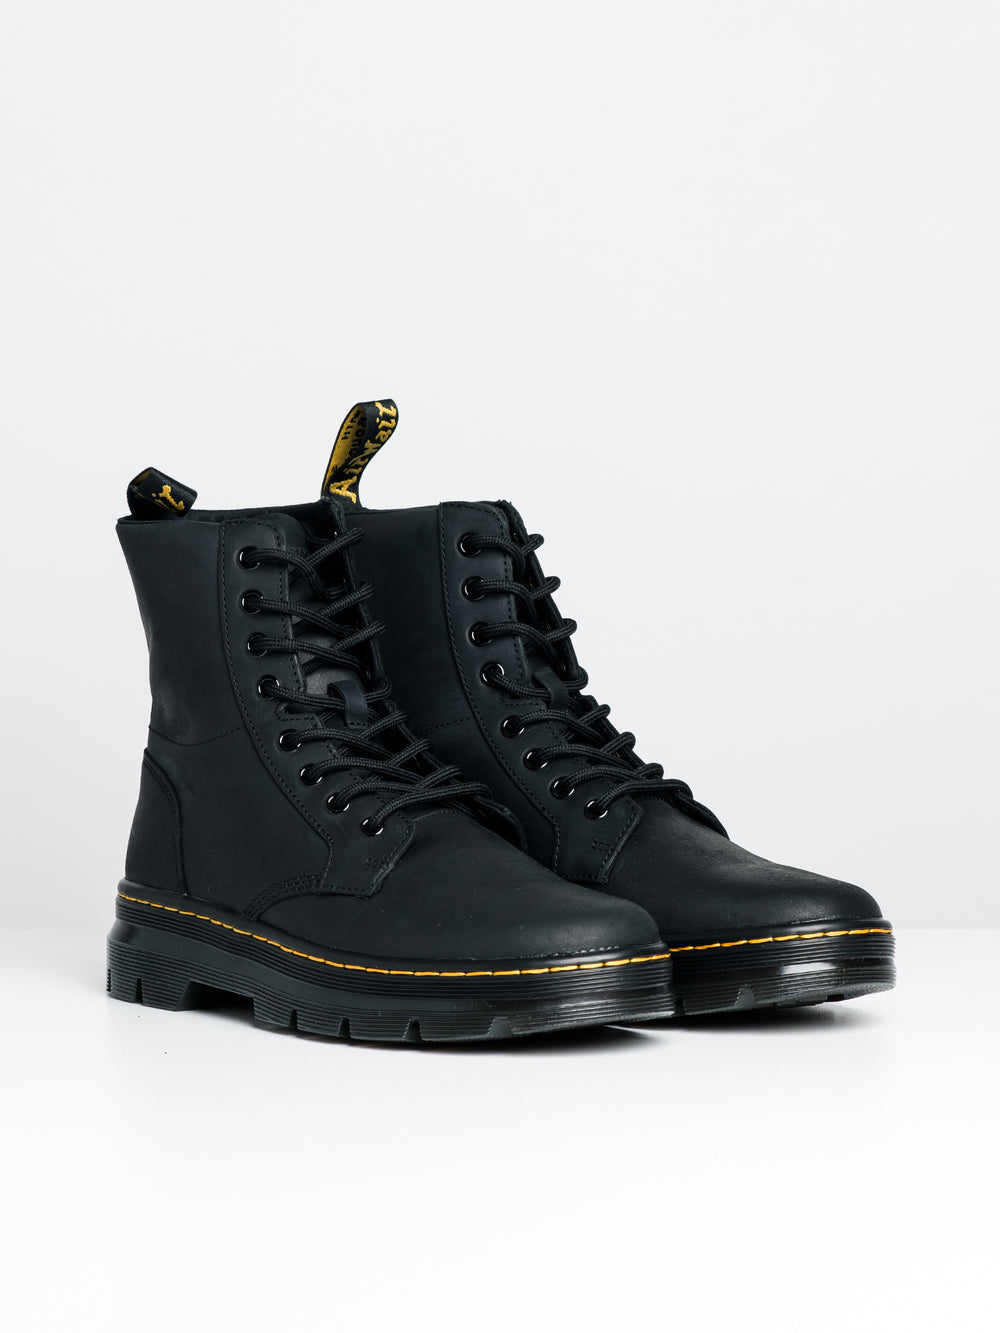 DR MARTENS COMBS LEATHER WYOMING BOOT